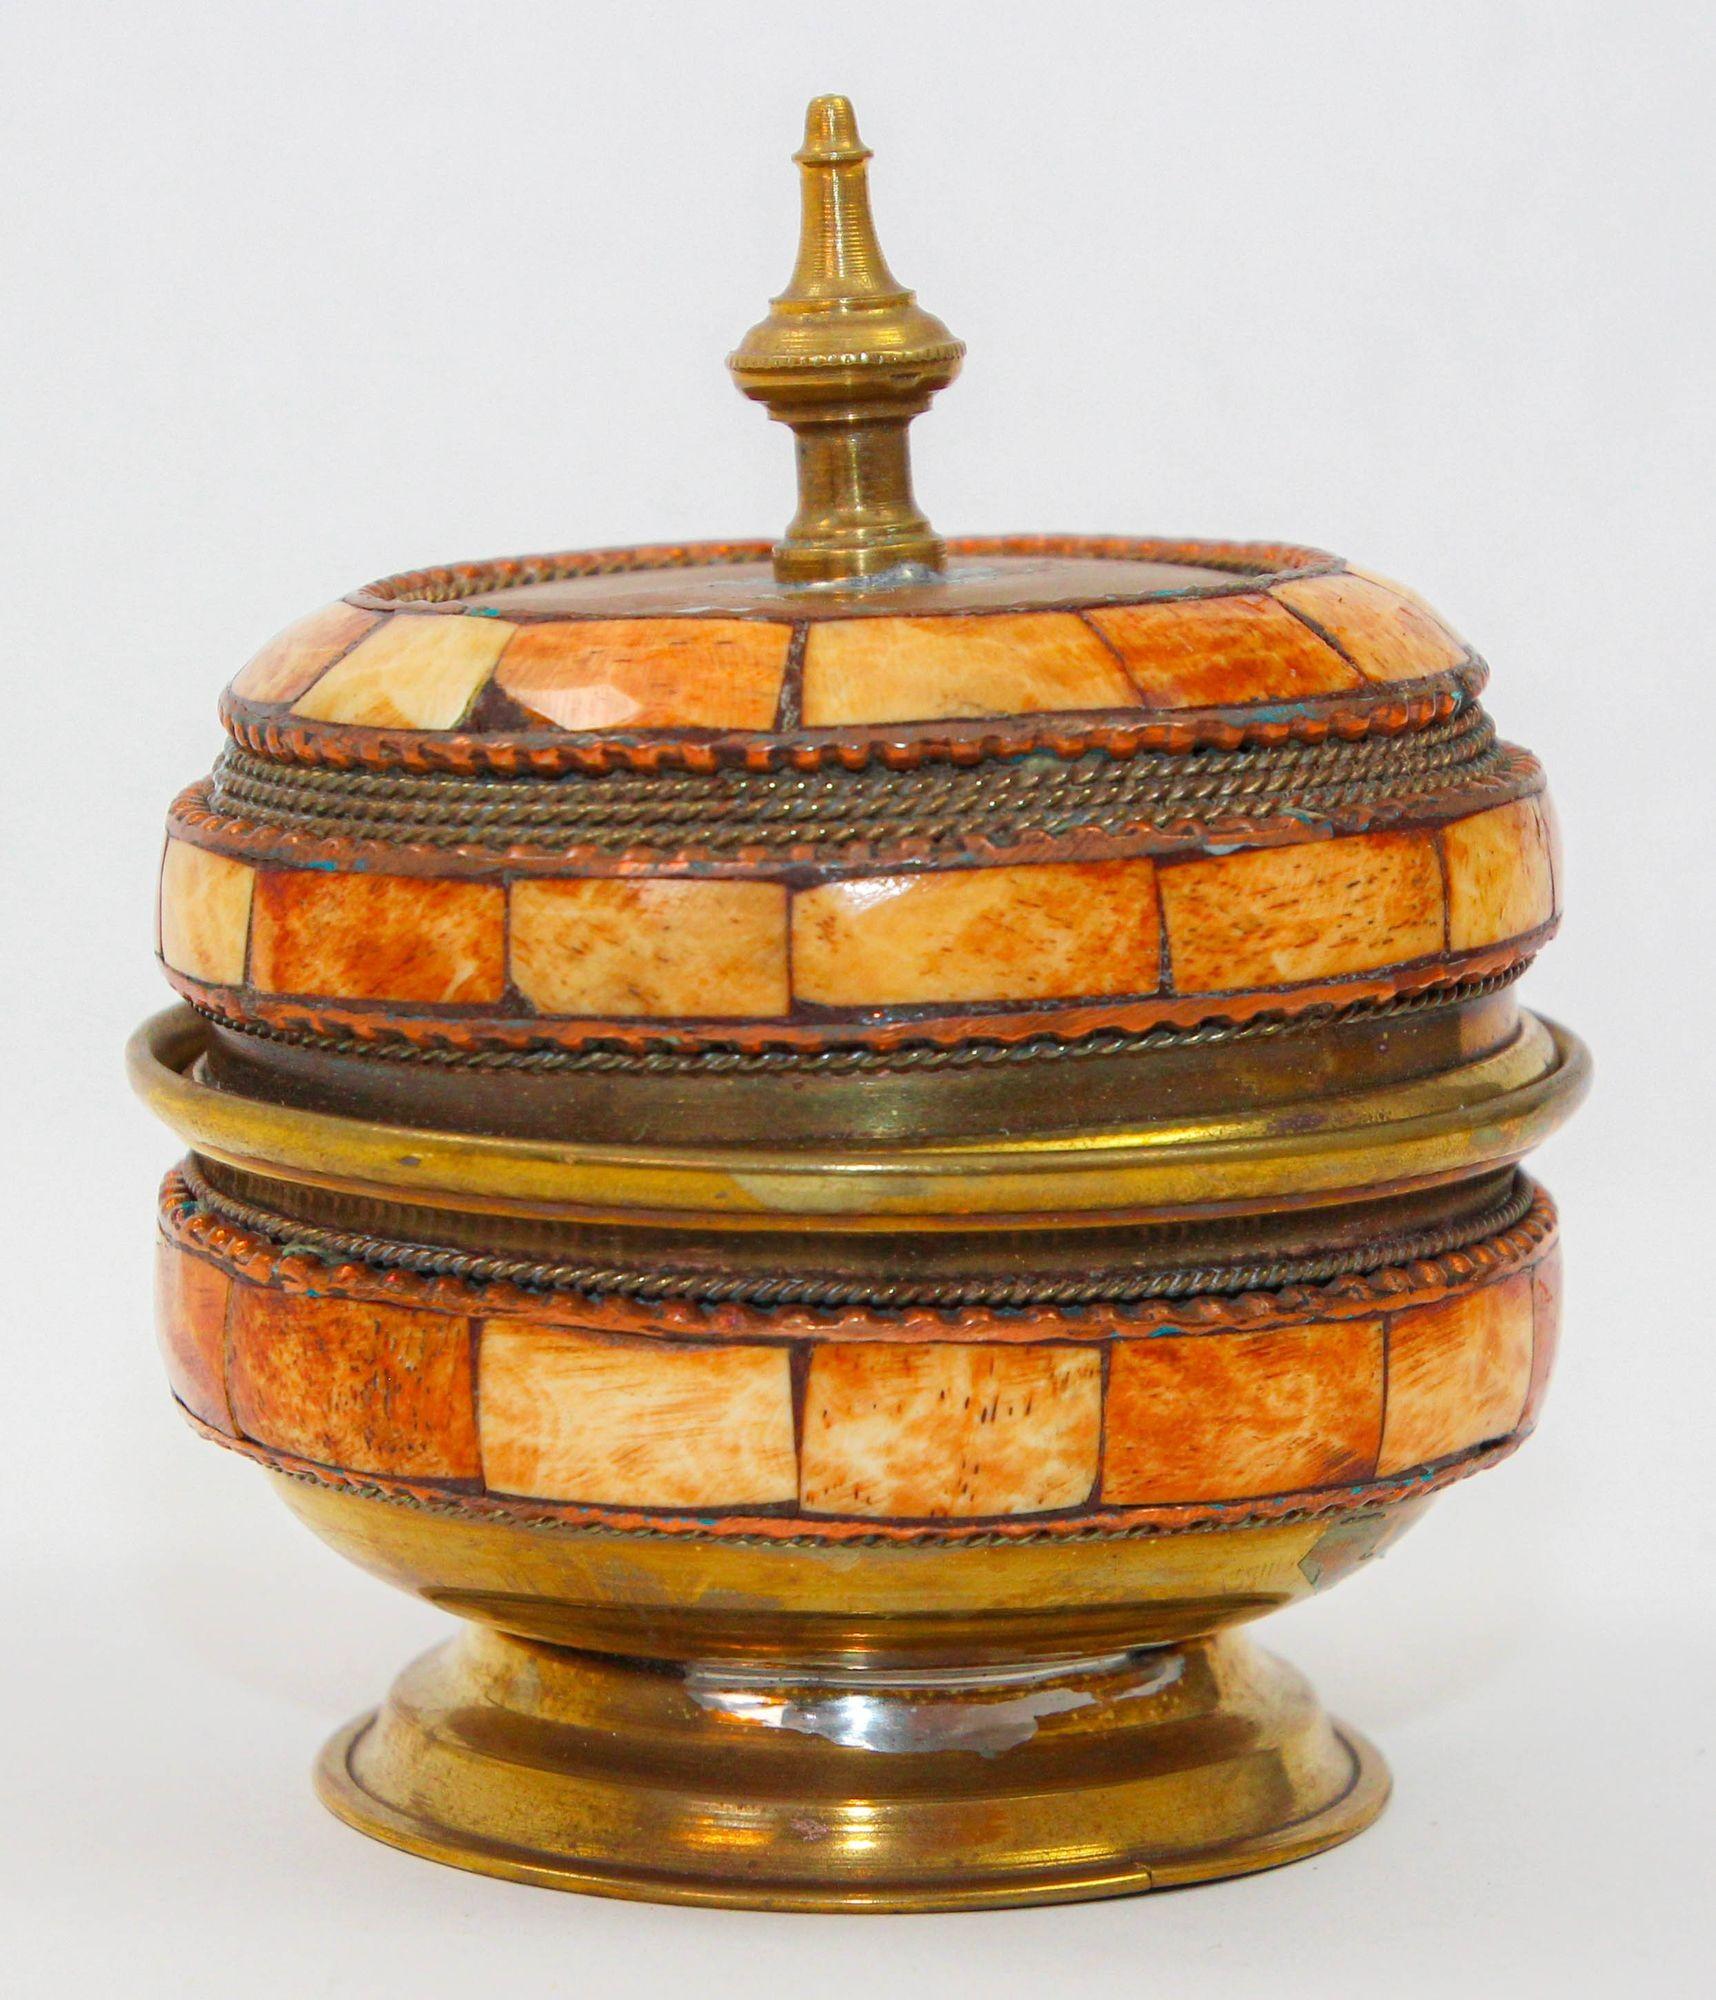 Vintage Moroccan footed box, handcrafted from brass with overlay carved bone in orange amber color and white.
Decorative Moroccan vintage brass canister with removable lid.
Handcrafted in Marrakech Morocco, circa 1950.
Condition, patina on brass